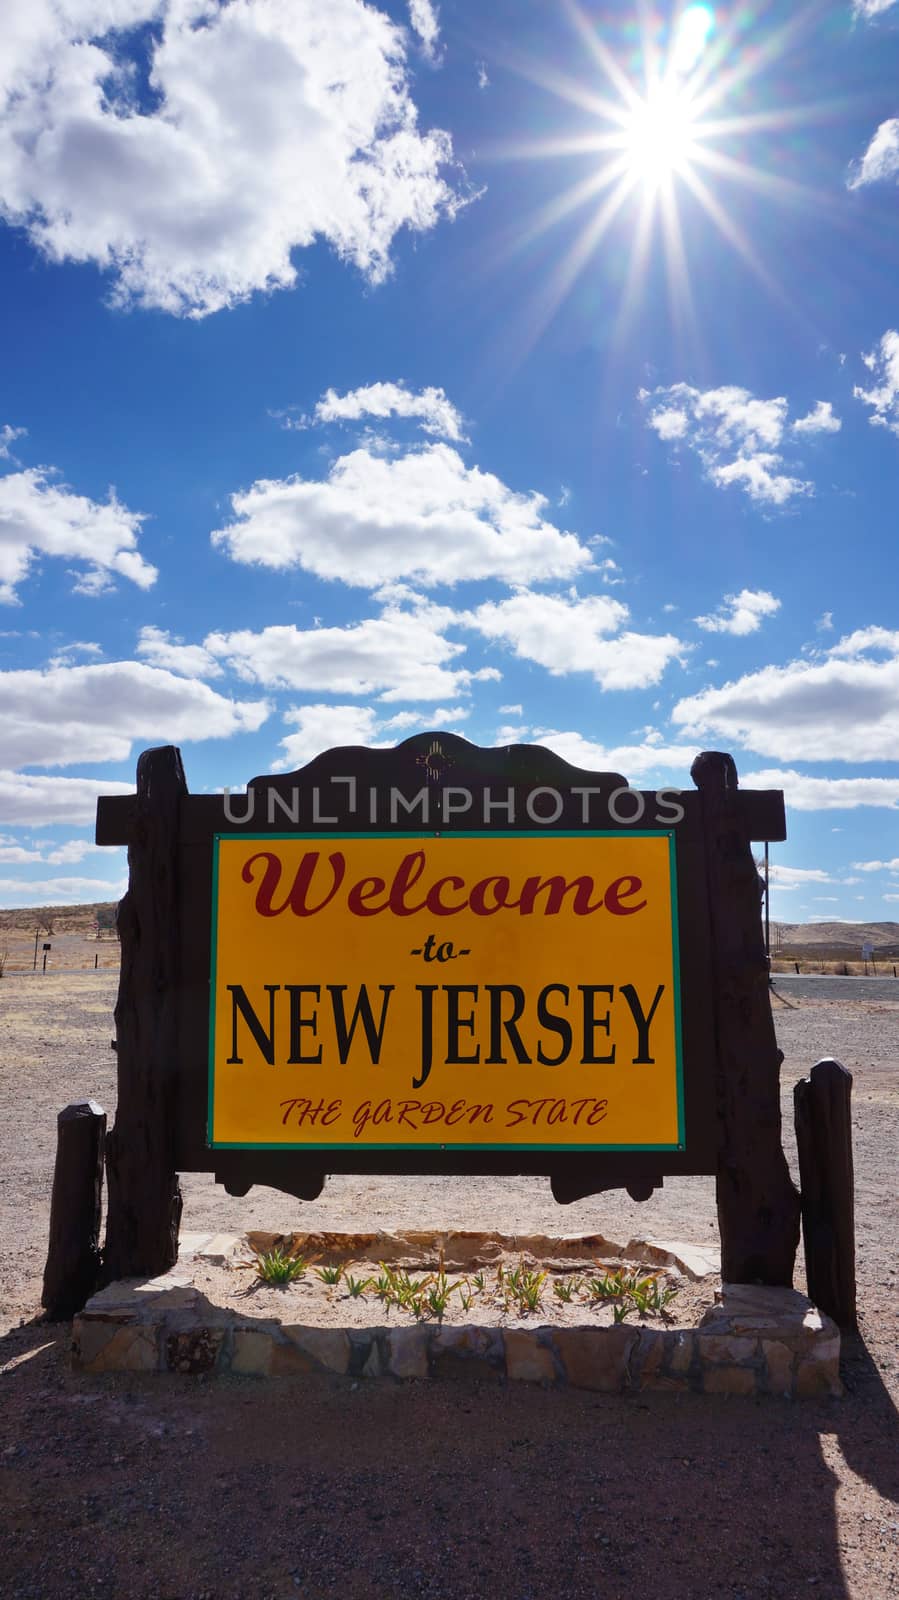 Welcome to New Jersey road sign with blue sky